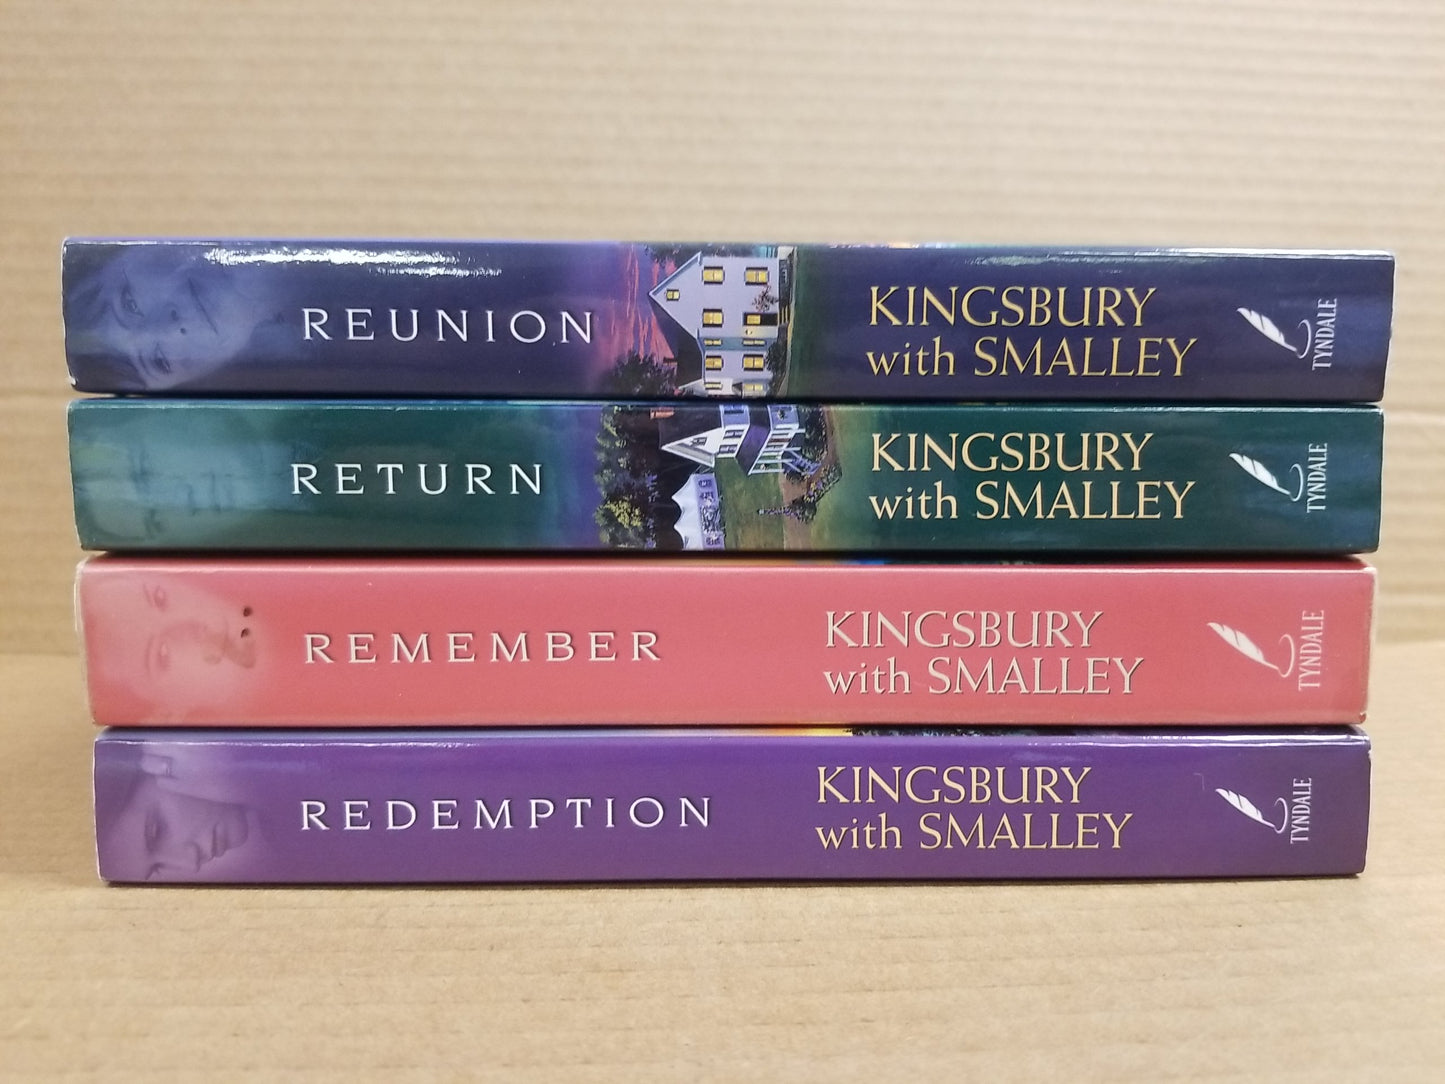 KAREN KINGSBURY with Gary Smalley
Lot of 4 REDEMPTION Series Books